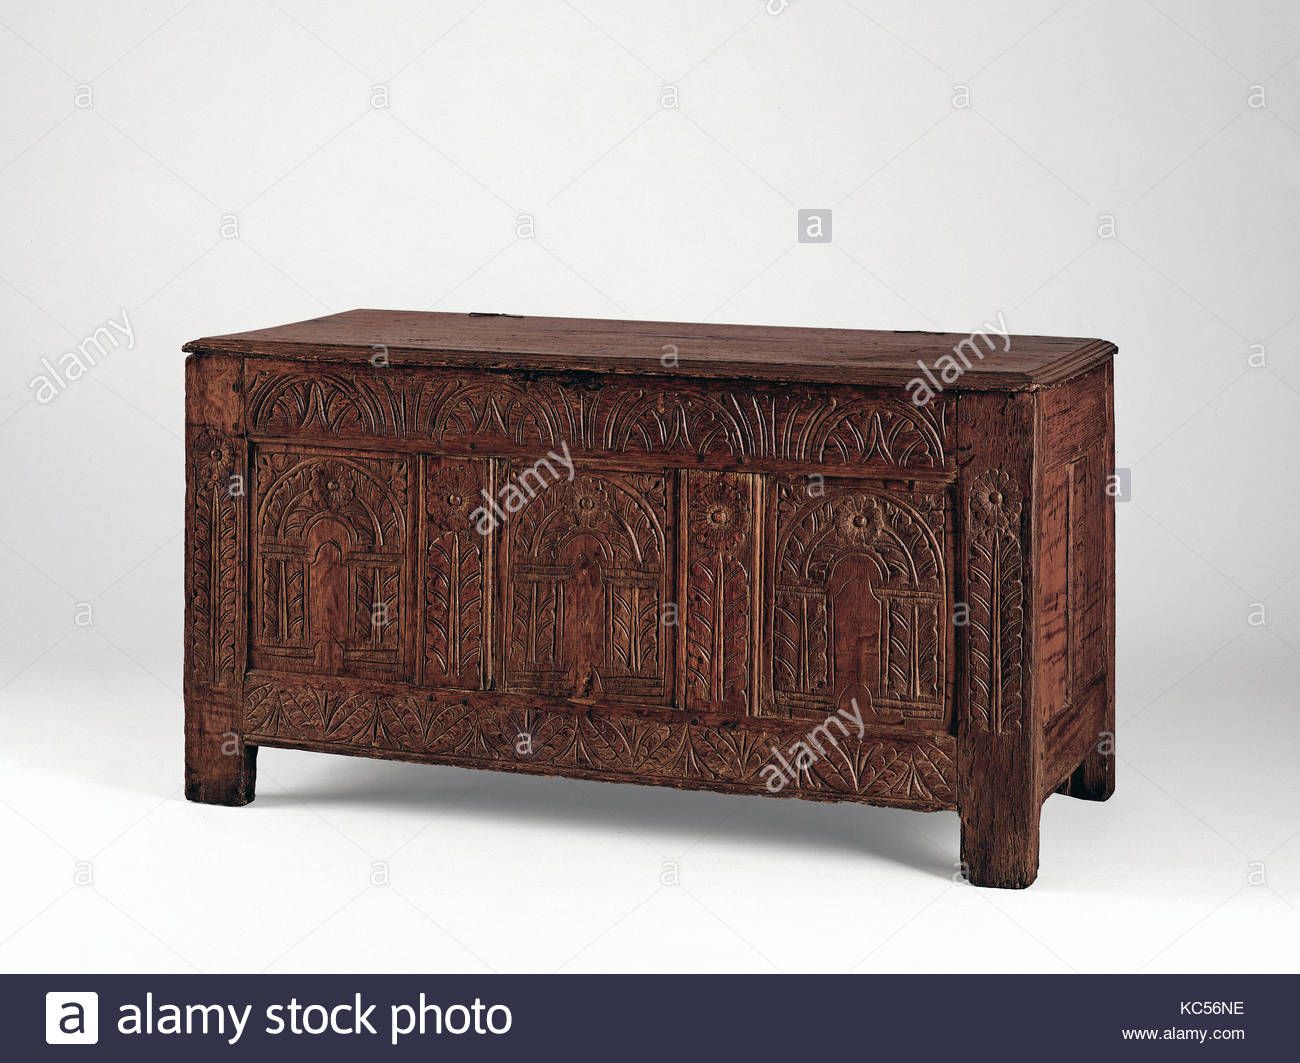 120 Cm X 80 Stockfotos & 120 Cm X 80 Bilder – Alamy Intended For Current Shoreland Sideboards (View 16 of 20)